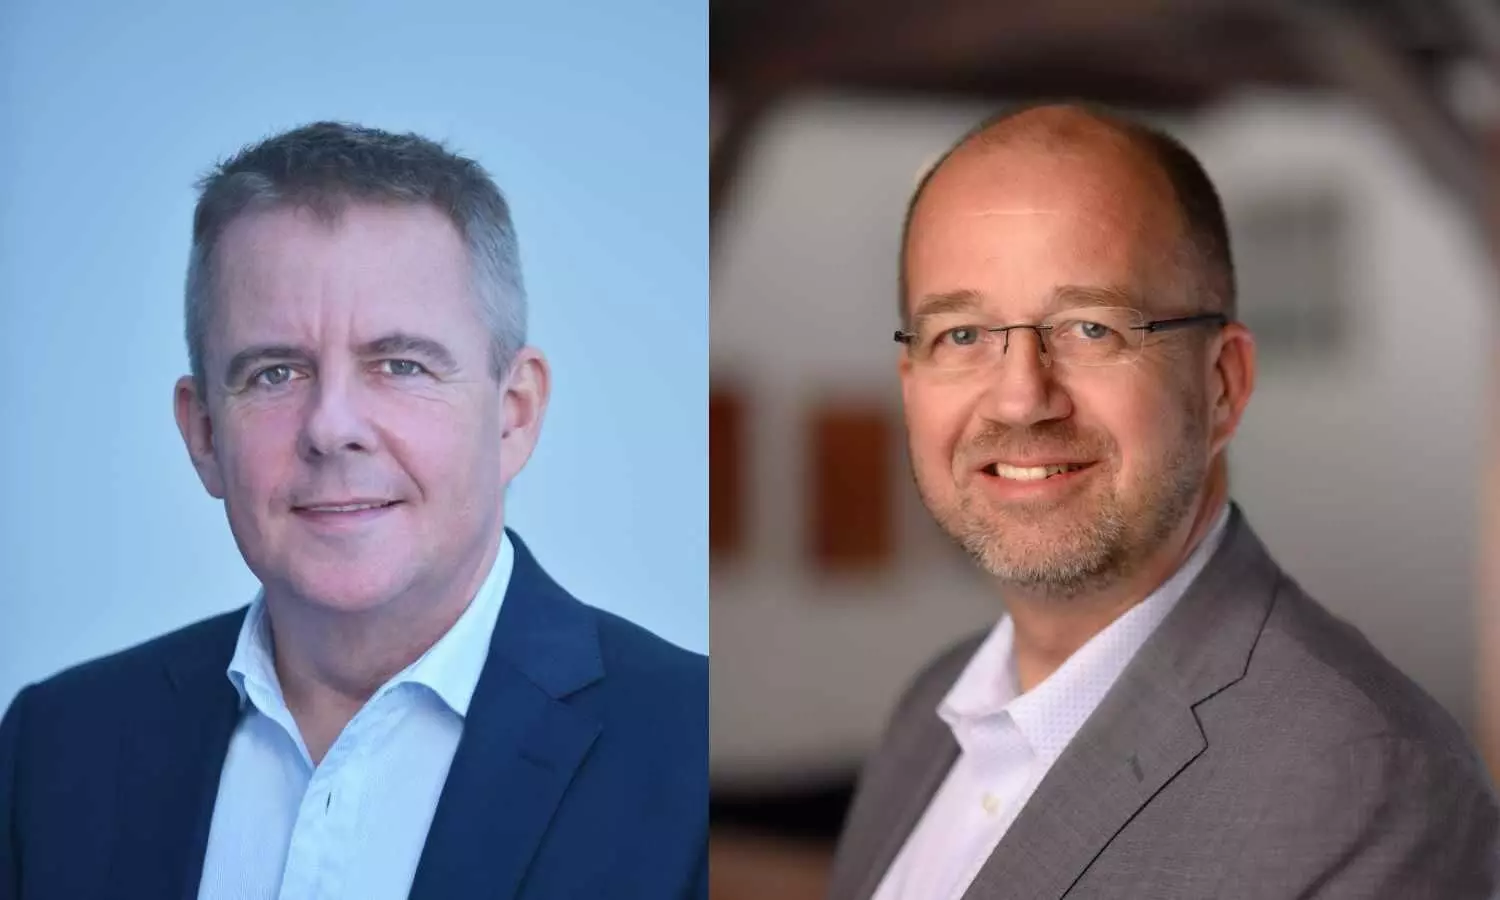 Steen Christensen joins SEKO as Chief Operating Officer – International, Paul Good takes over as Managing Director, Sydney